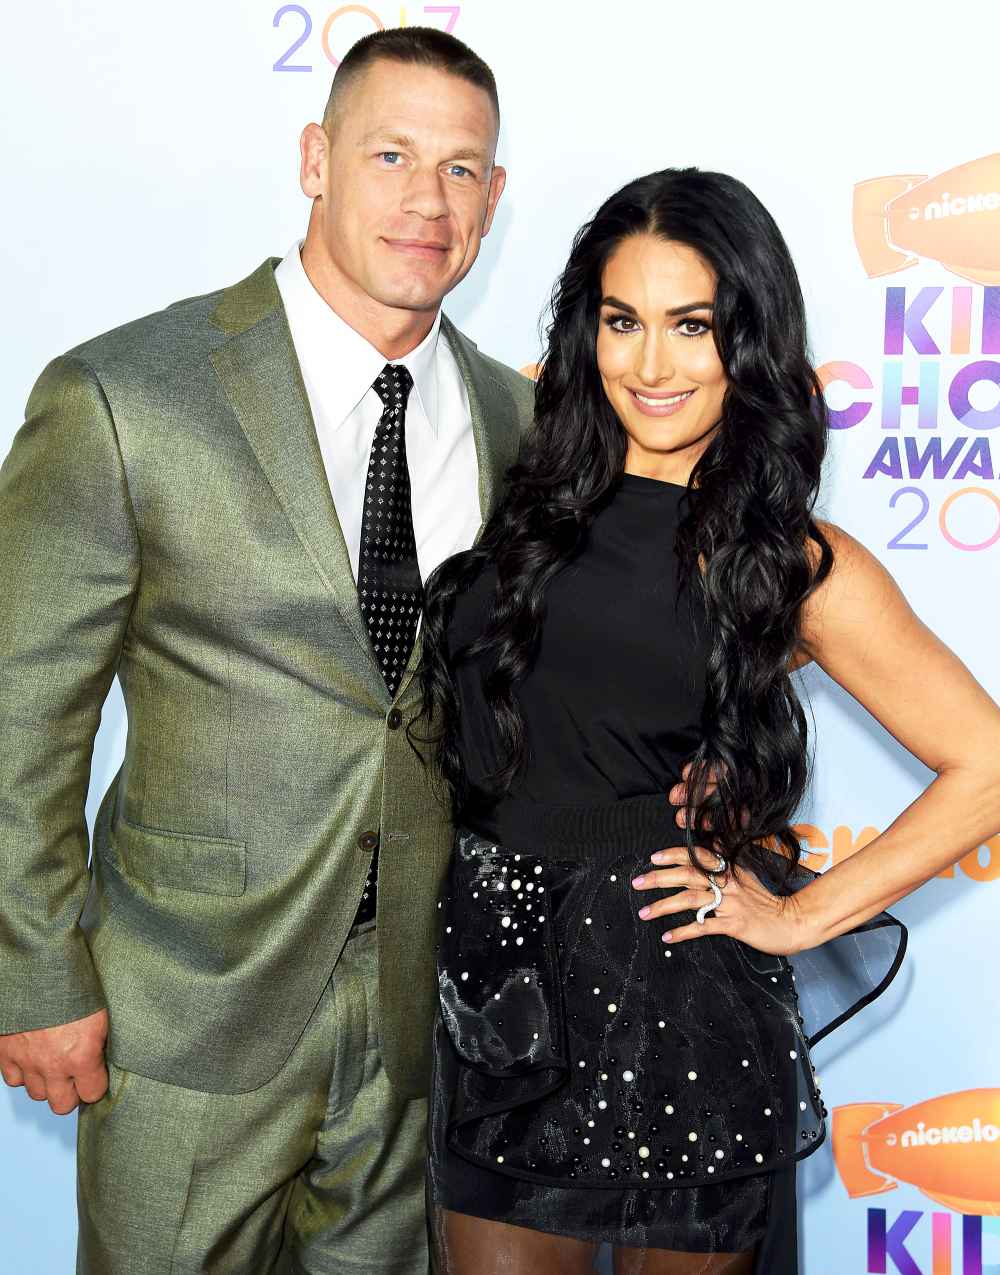 John Cena and Nikki Bella arrive at the Nickelodeon's 2017 Kids' Choice Awards at USC Galen Center on March 11, 2017 in Los Angeles, California.